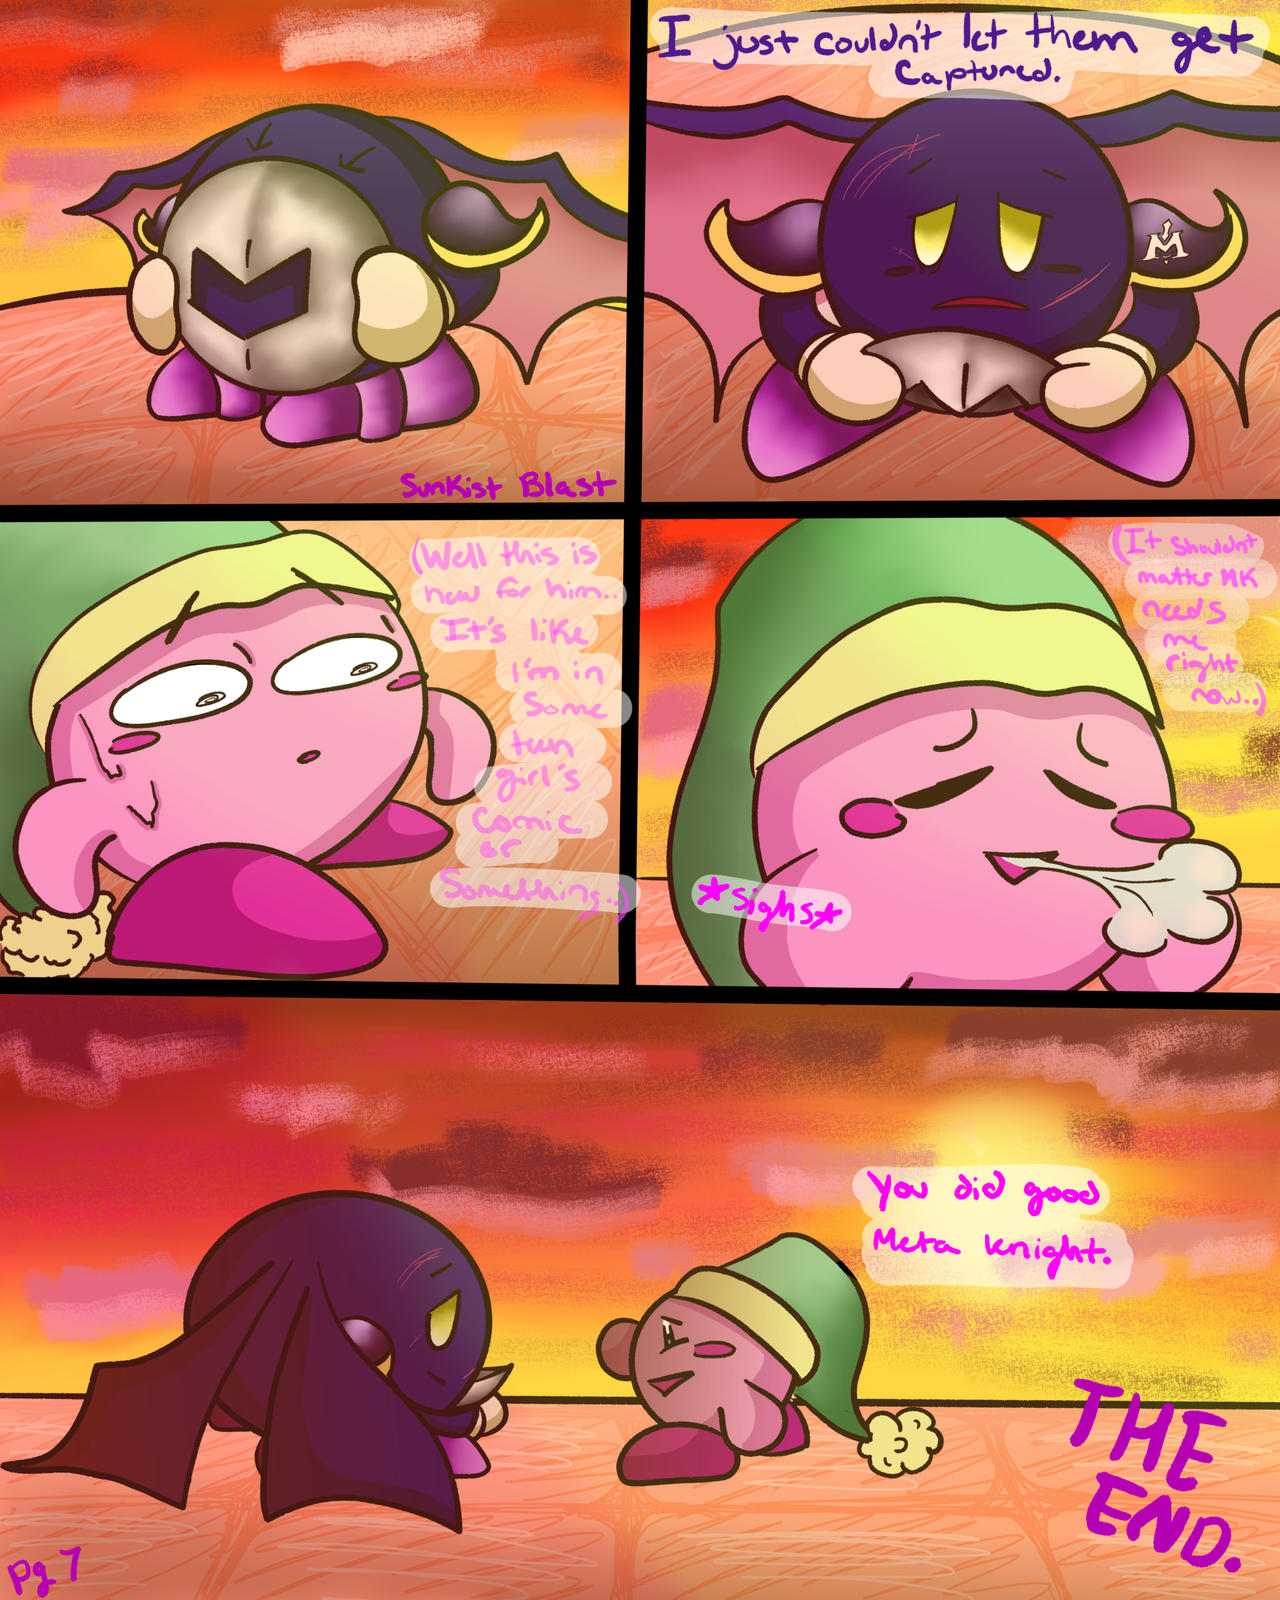 Why Meta Knight Defended Waddle Dee Town (page 7) by Sunkistblast on  DeviantArt